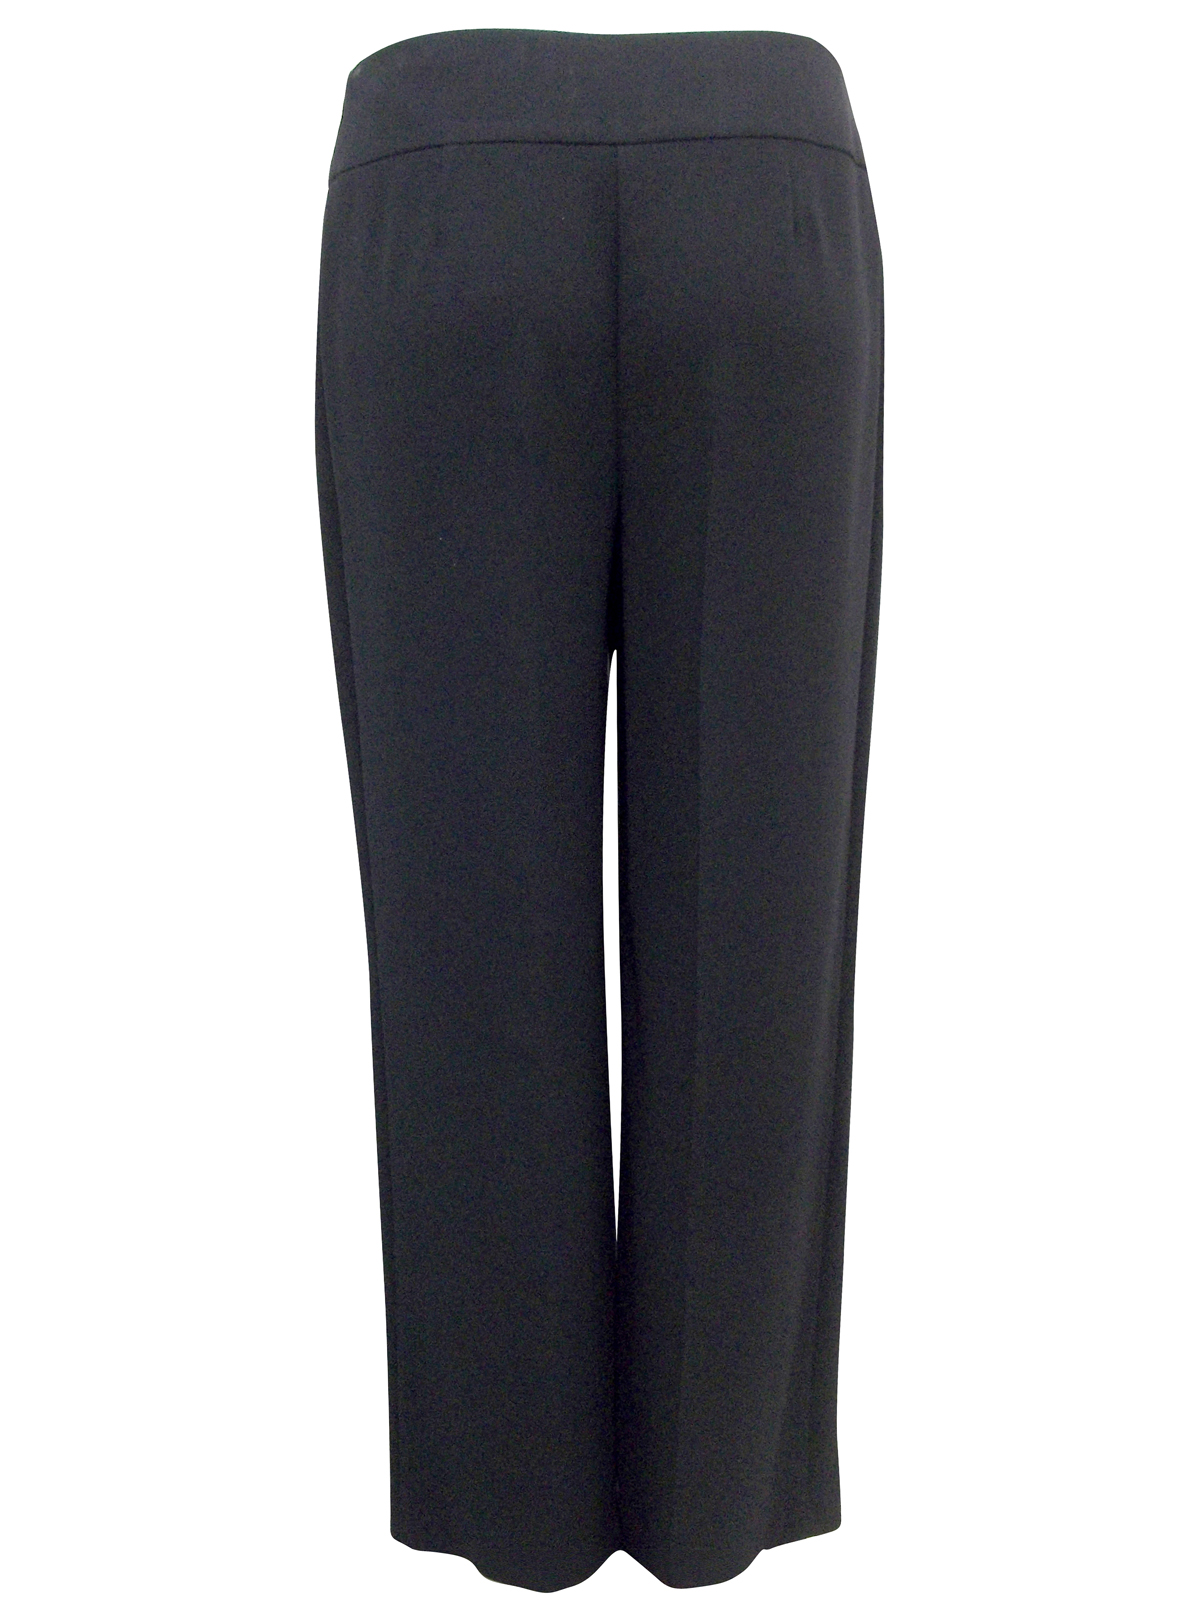 Marks and Spencer - - M&5 BLACK Low Rise Wide Leg Trousers - Size 12